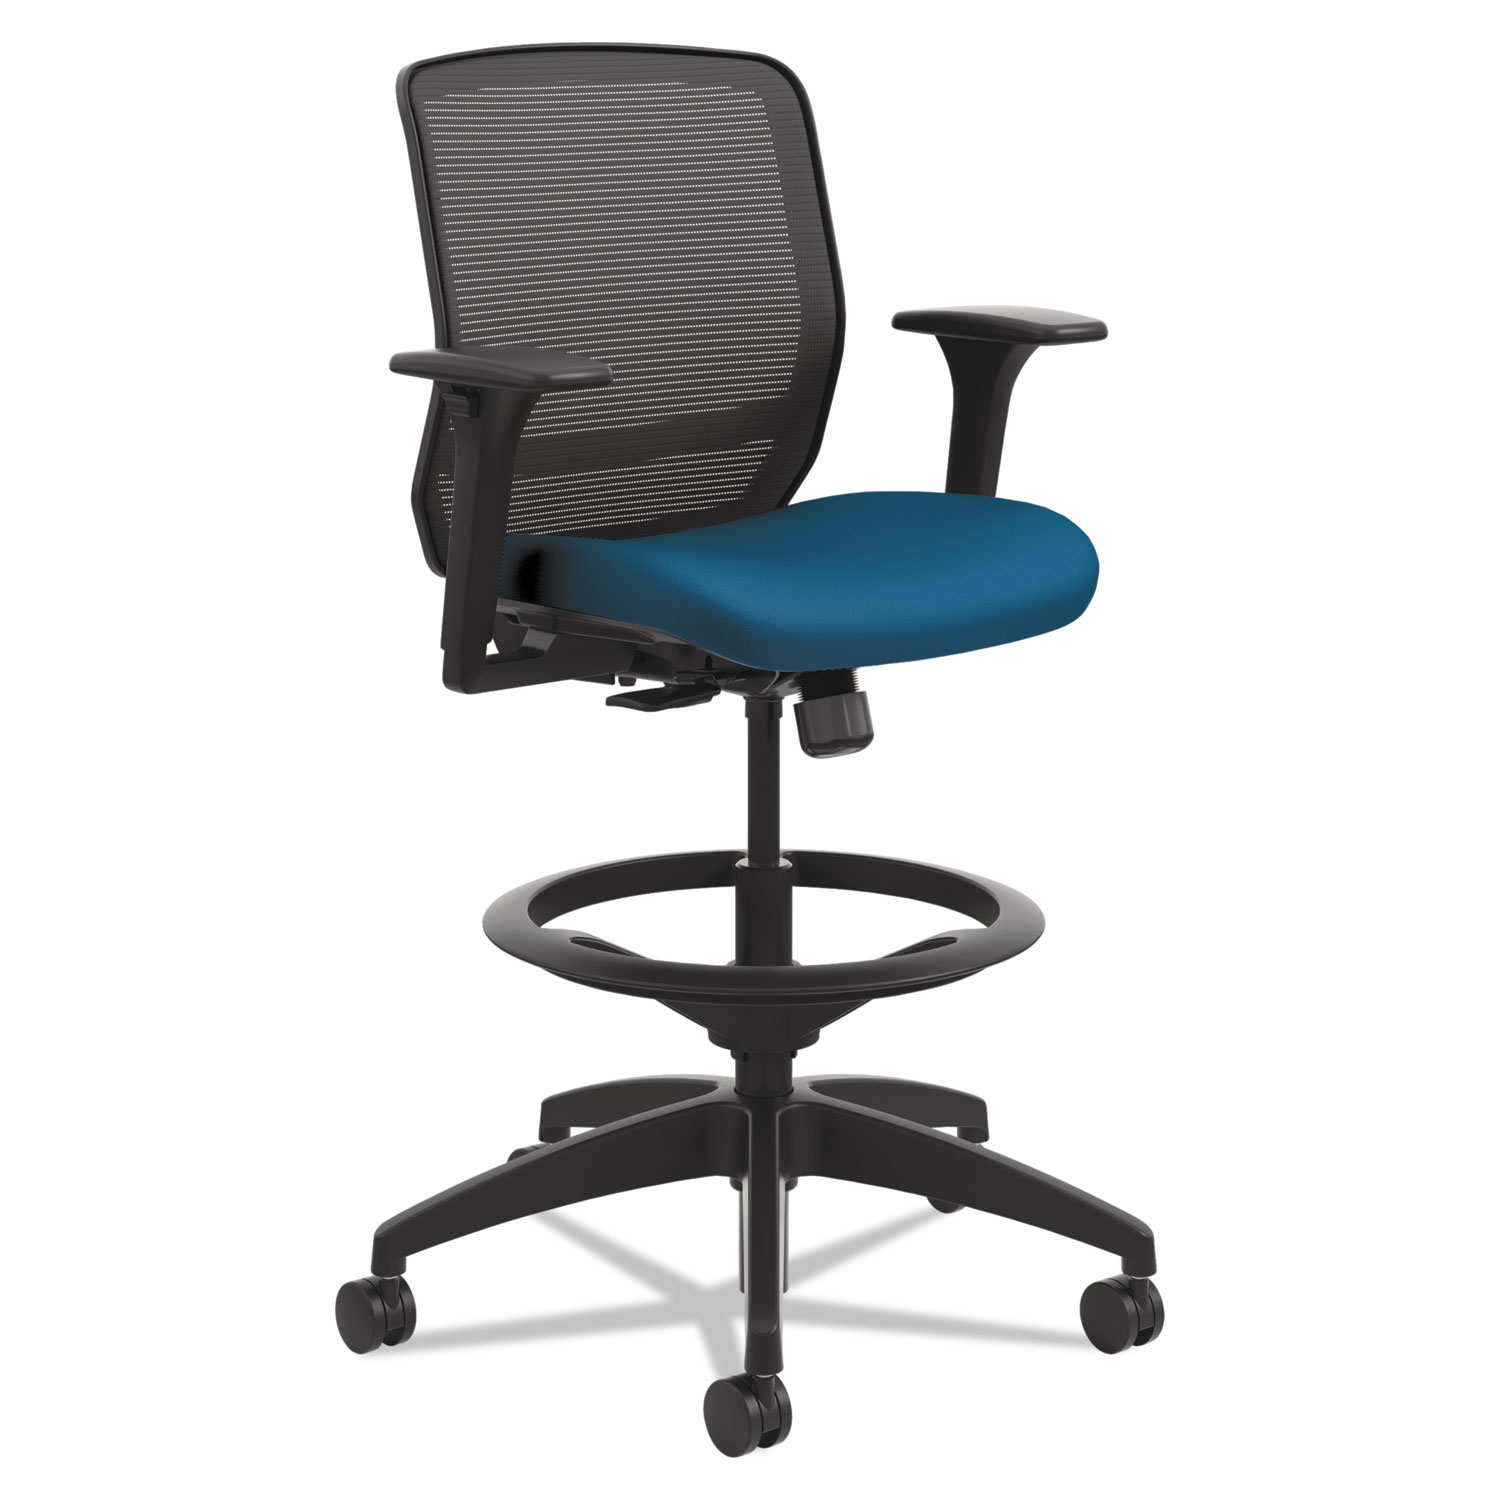  HON HQTSM.Y0.A.H.IM.CU97.SB Quotient Series Mesh Mid-Back Task Stool, 33 Seat Height, Supports up to 300 lbs., Peacock Seat/Black Back, Black Base (HONQTSMY1ACU97) 